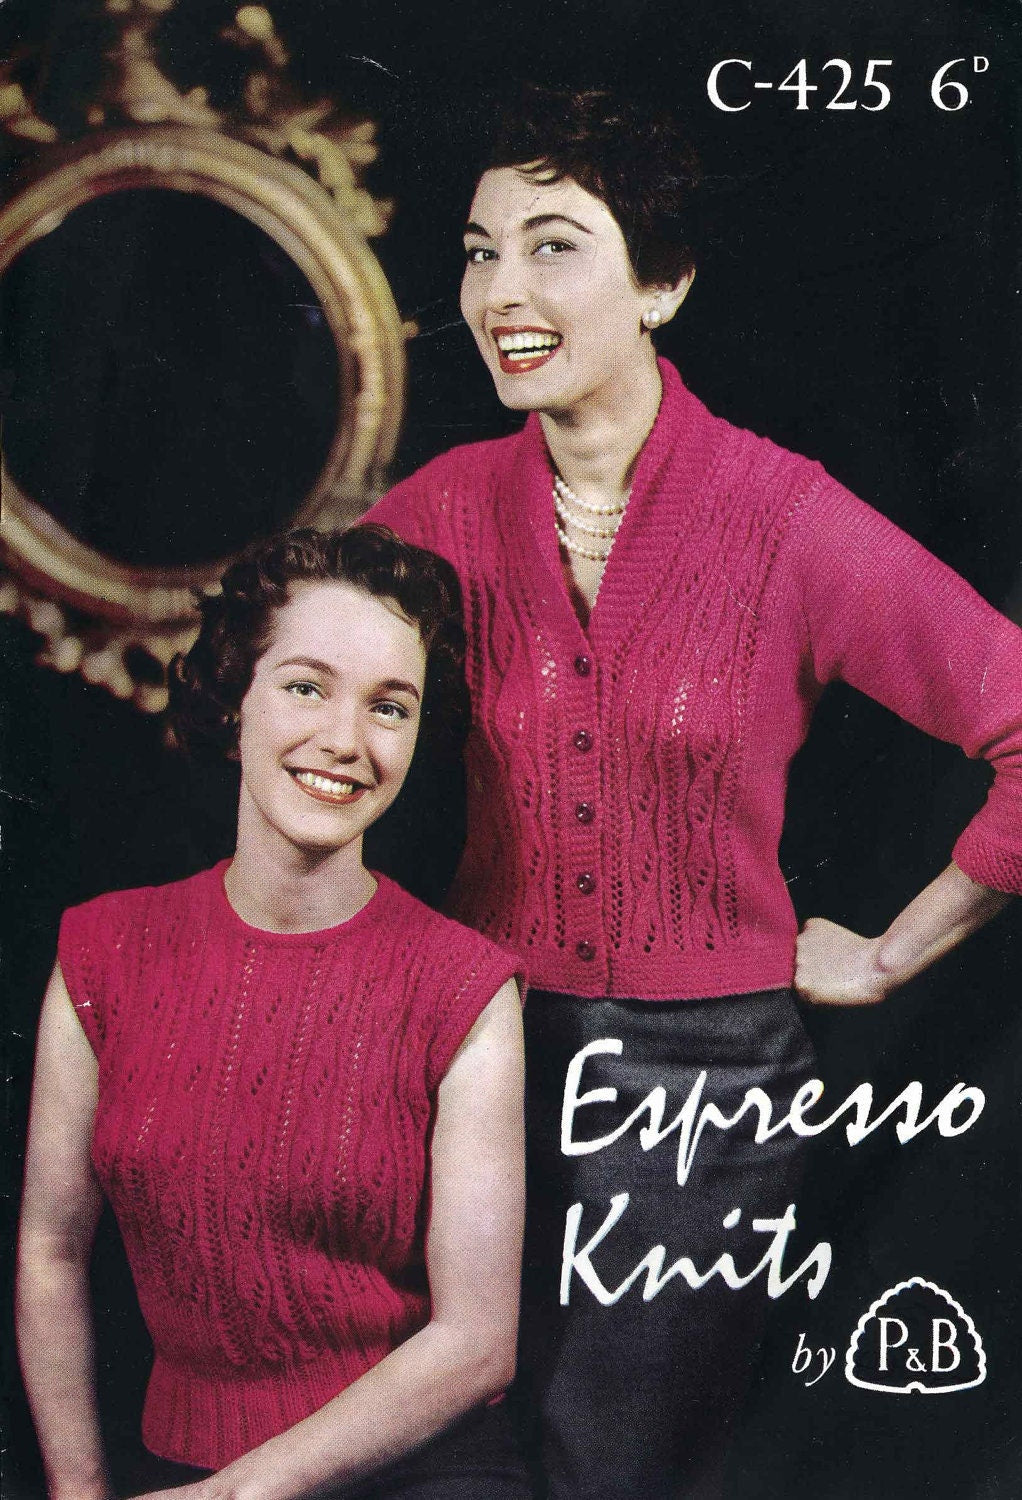 Ladies Jumper, Cardigan and Stole, 34"-36" Bust, DK, 60s Knitting Pattern, P&B 425